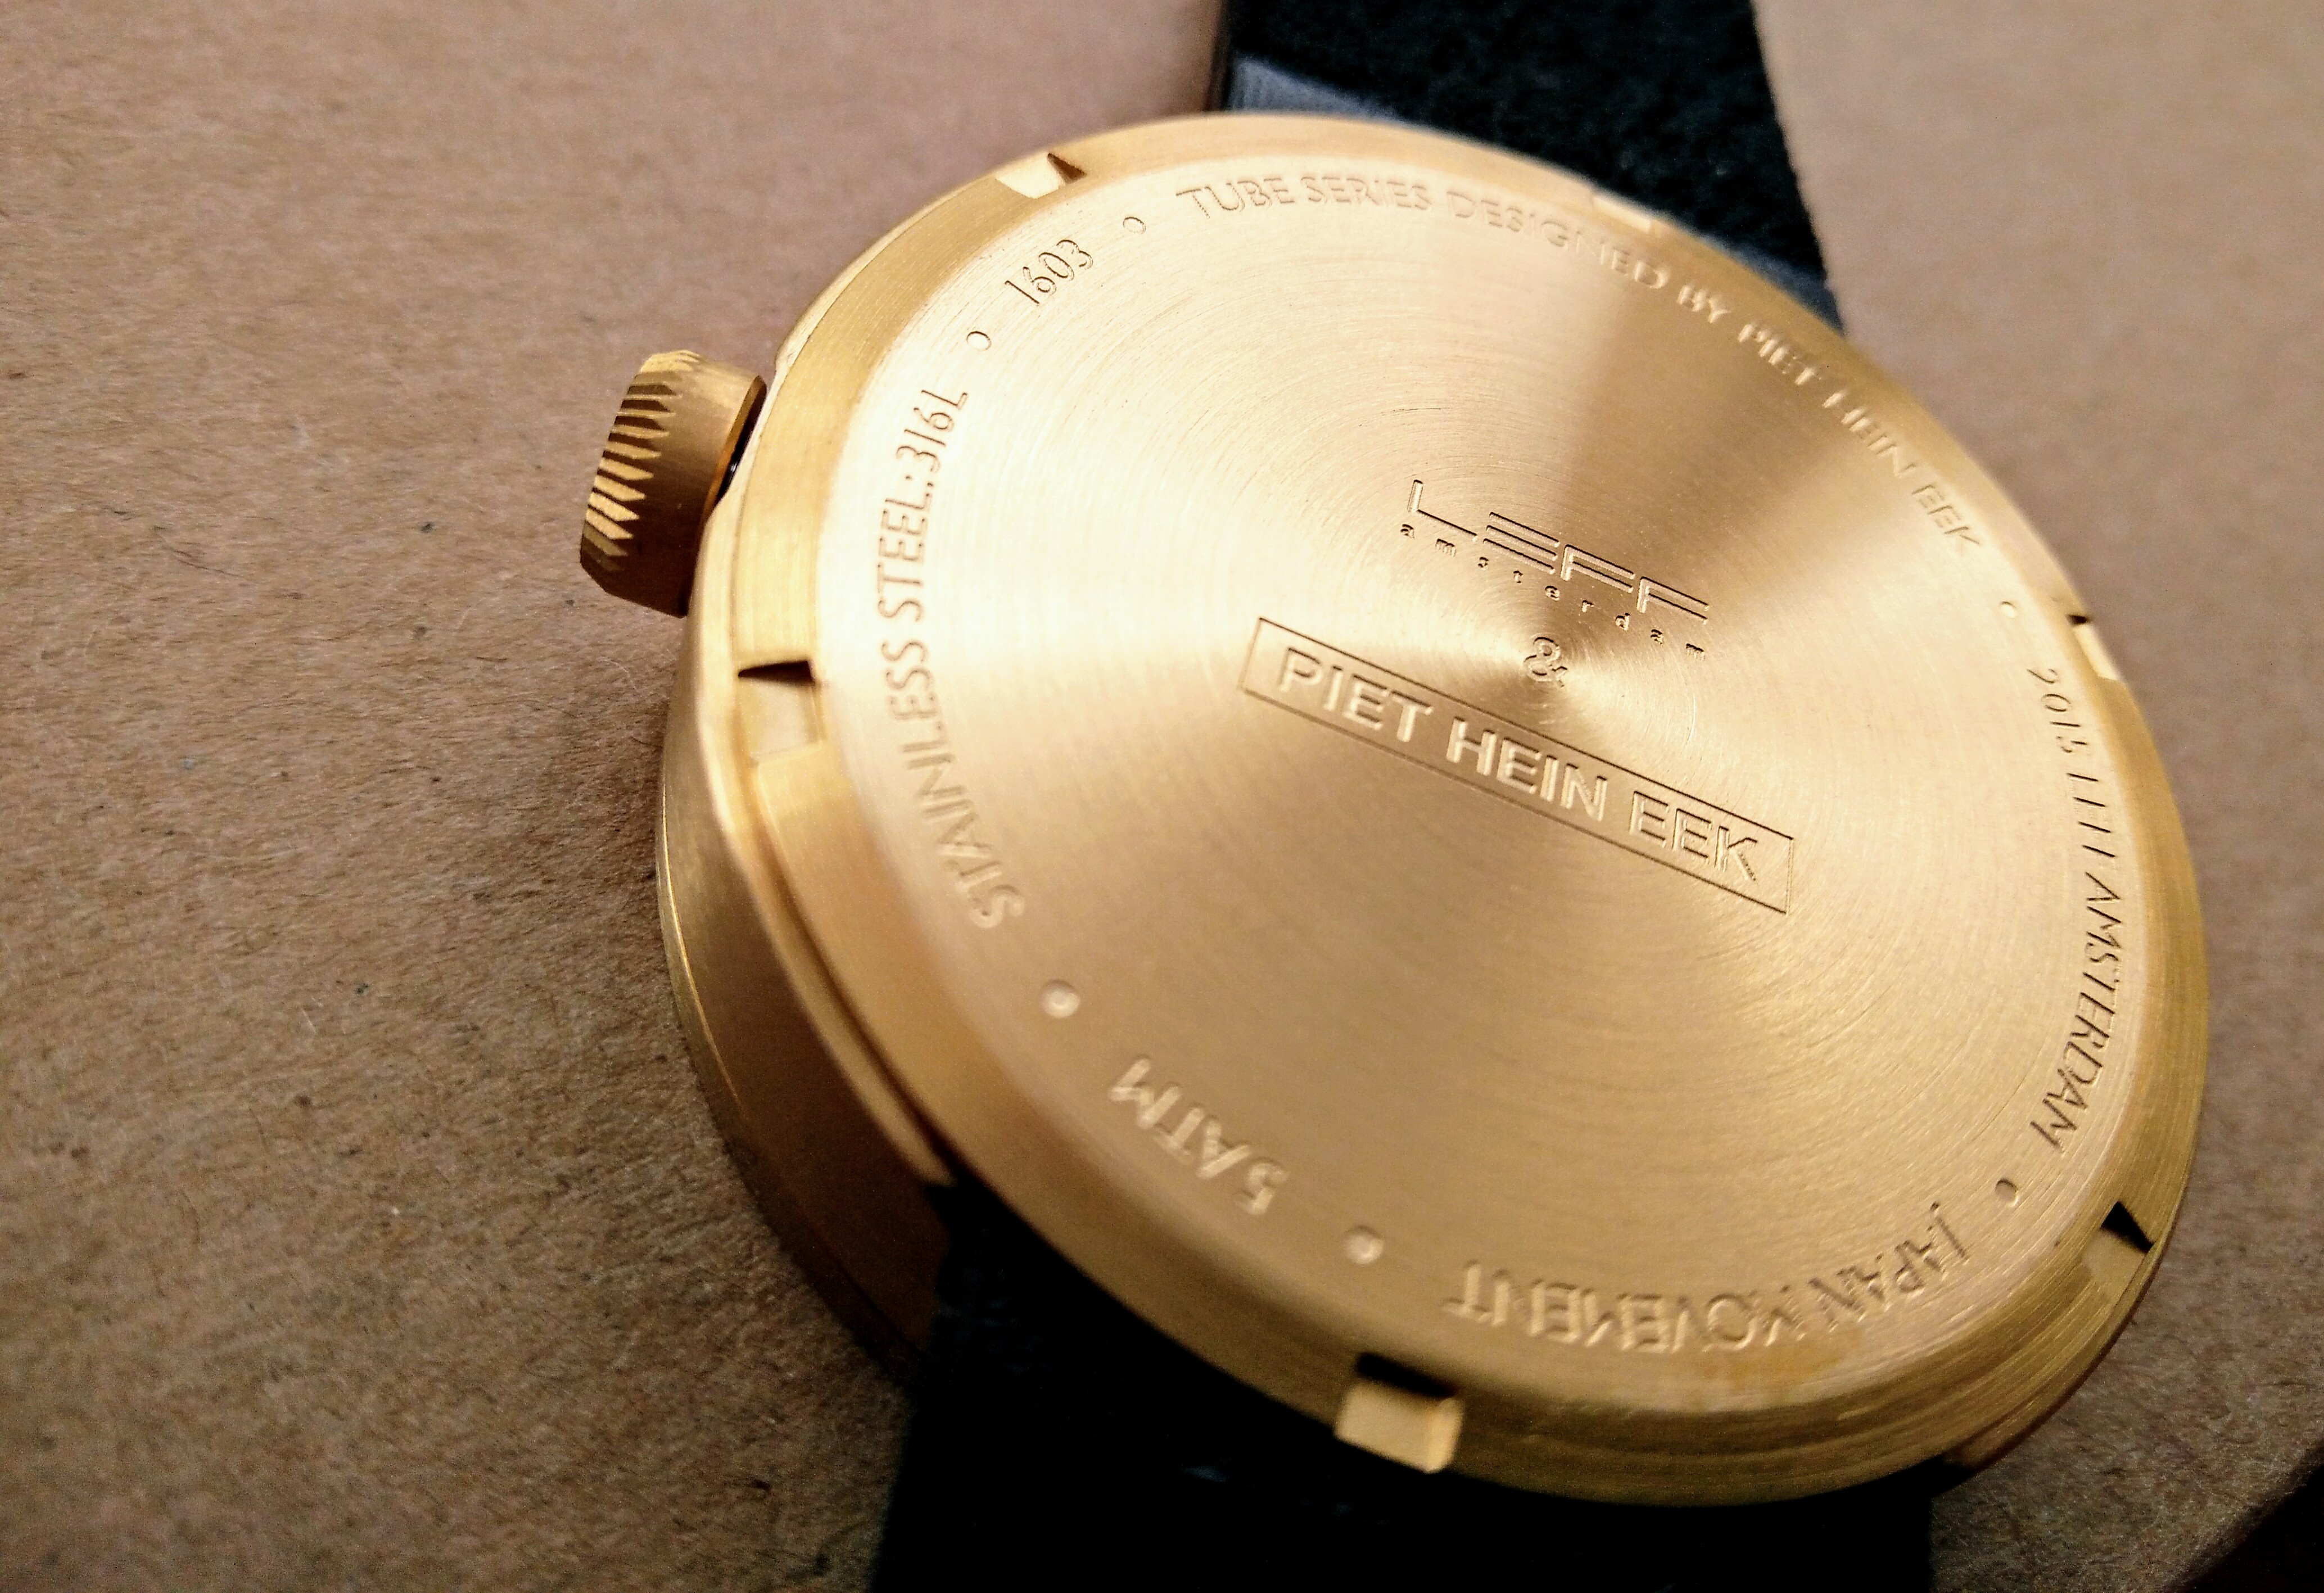 Leff amsterdam watches, Leff amsterdam watch review, amsterdam watches